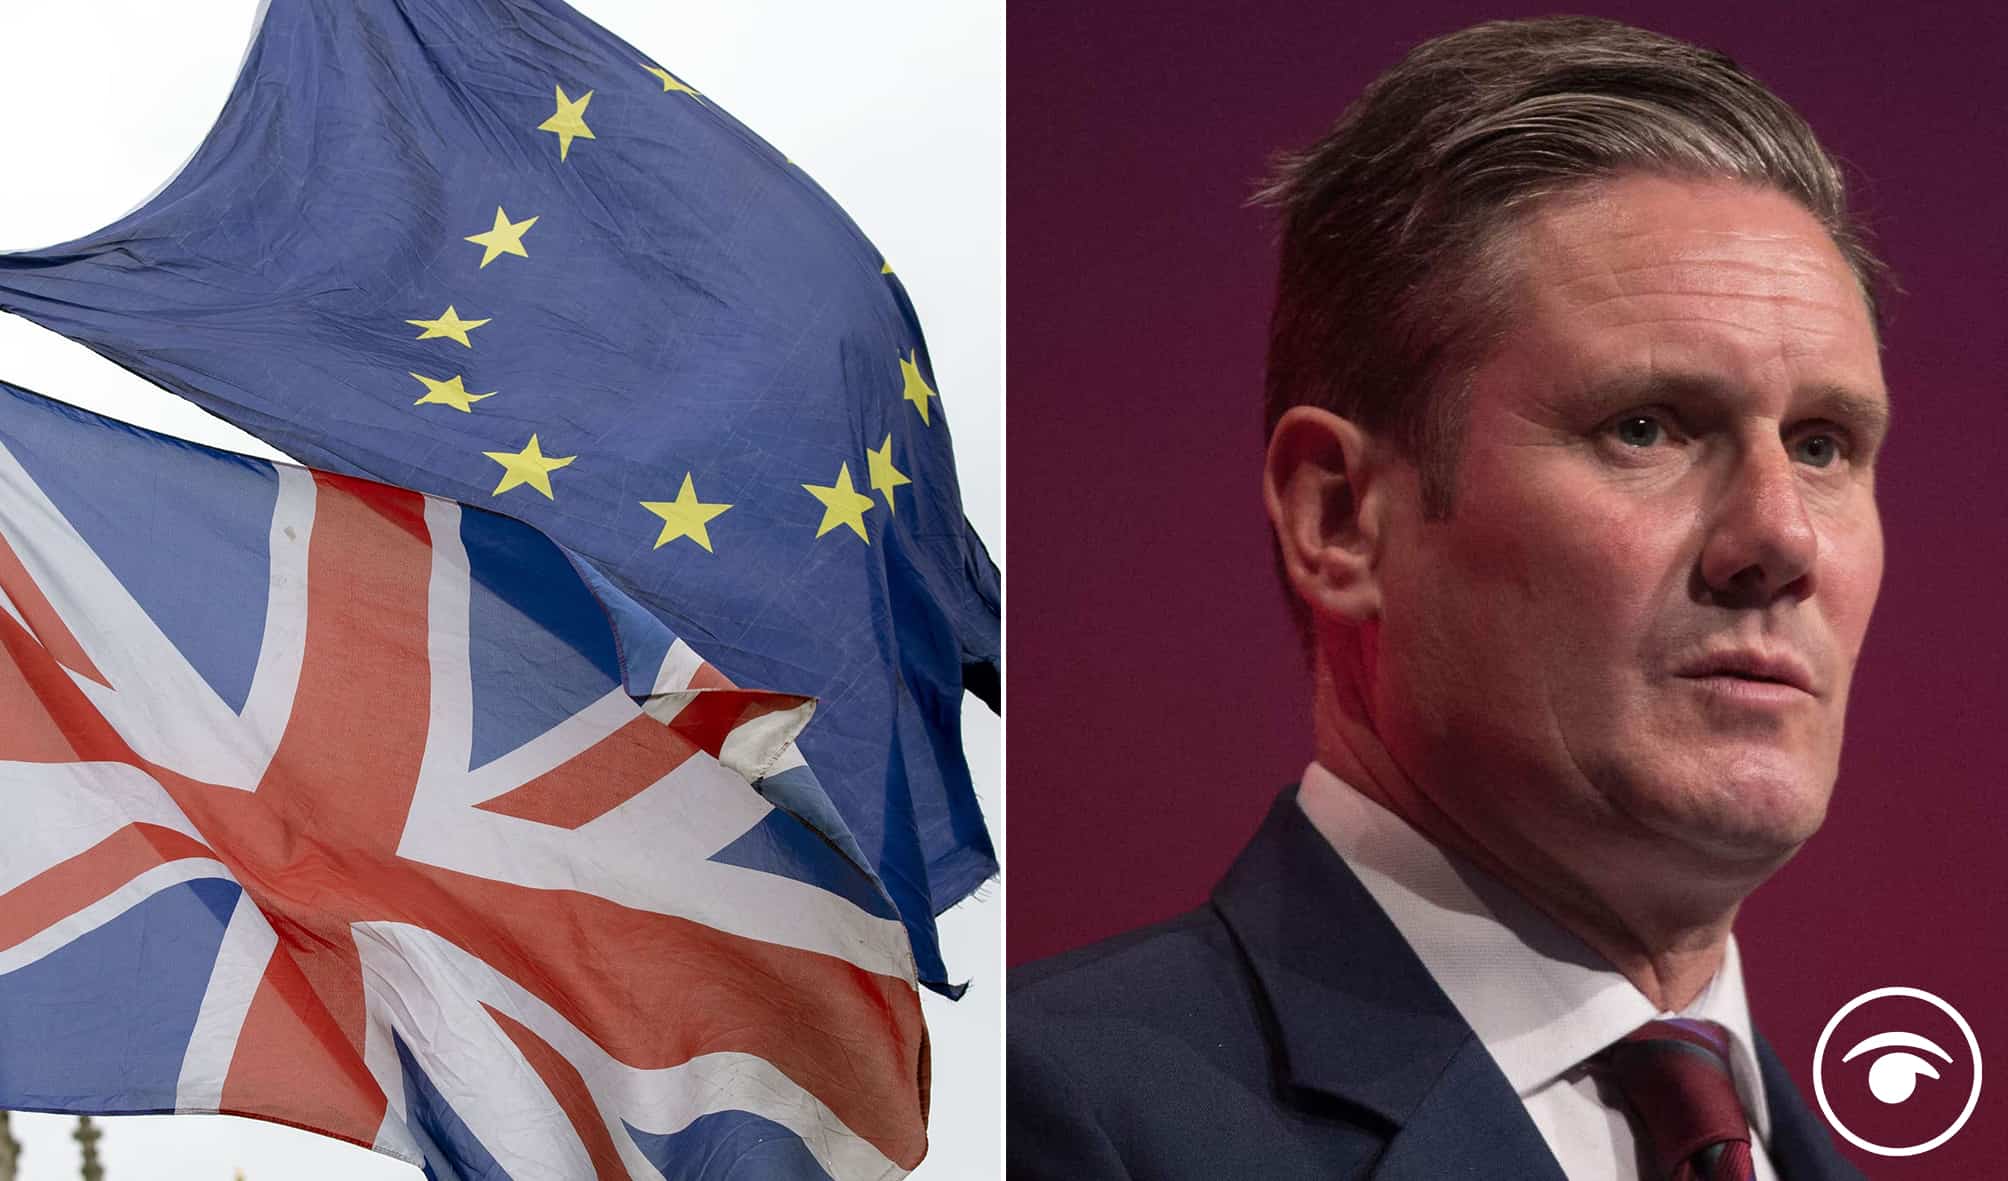 Brexit: Starmer says Labour will not fight ‘yesterday’s wars’ and doesn’t ‘want to rejoin’